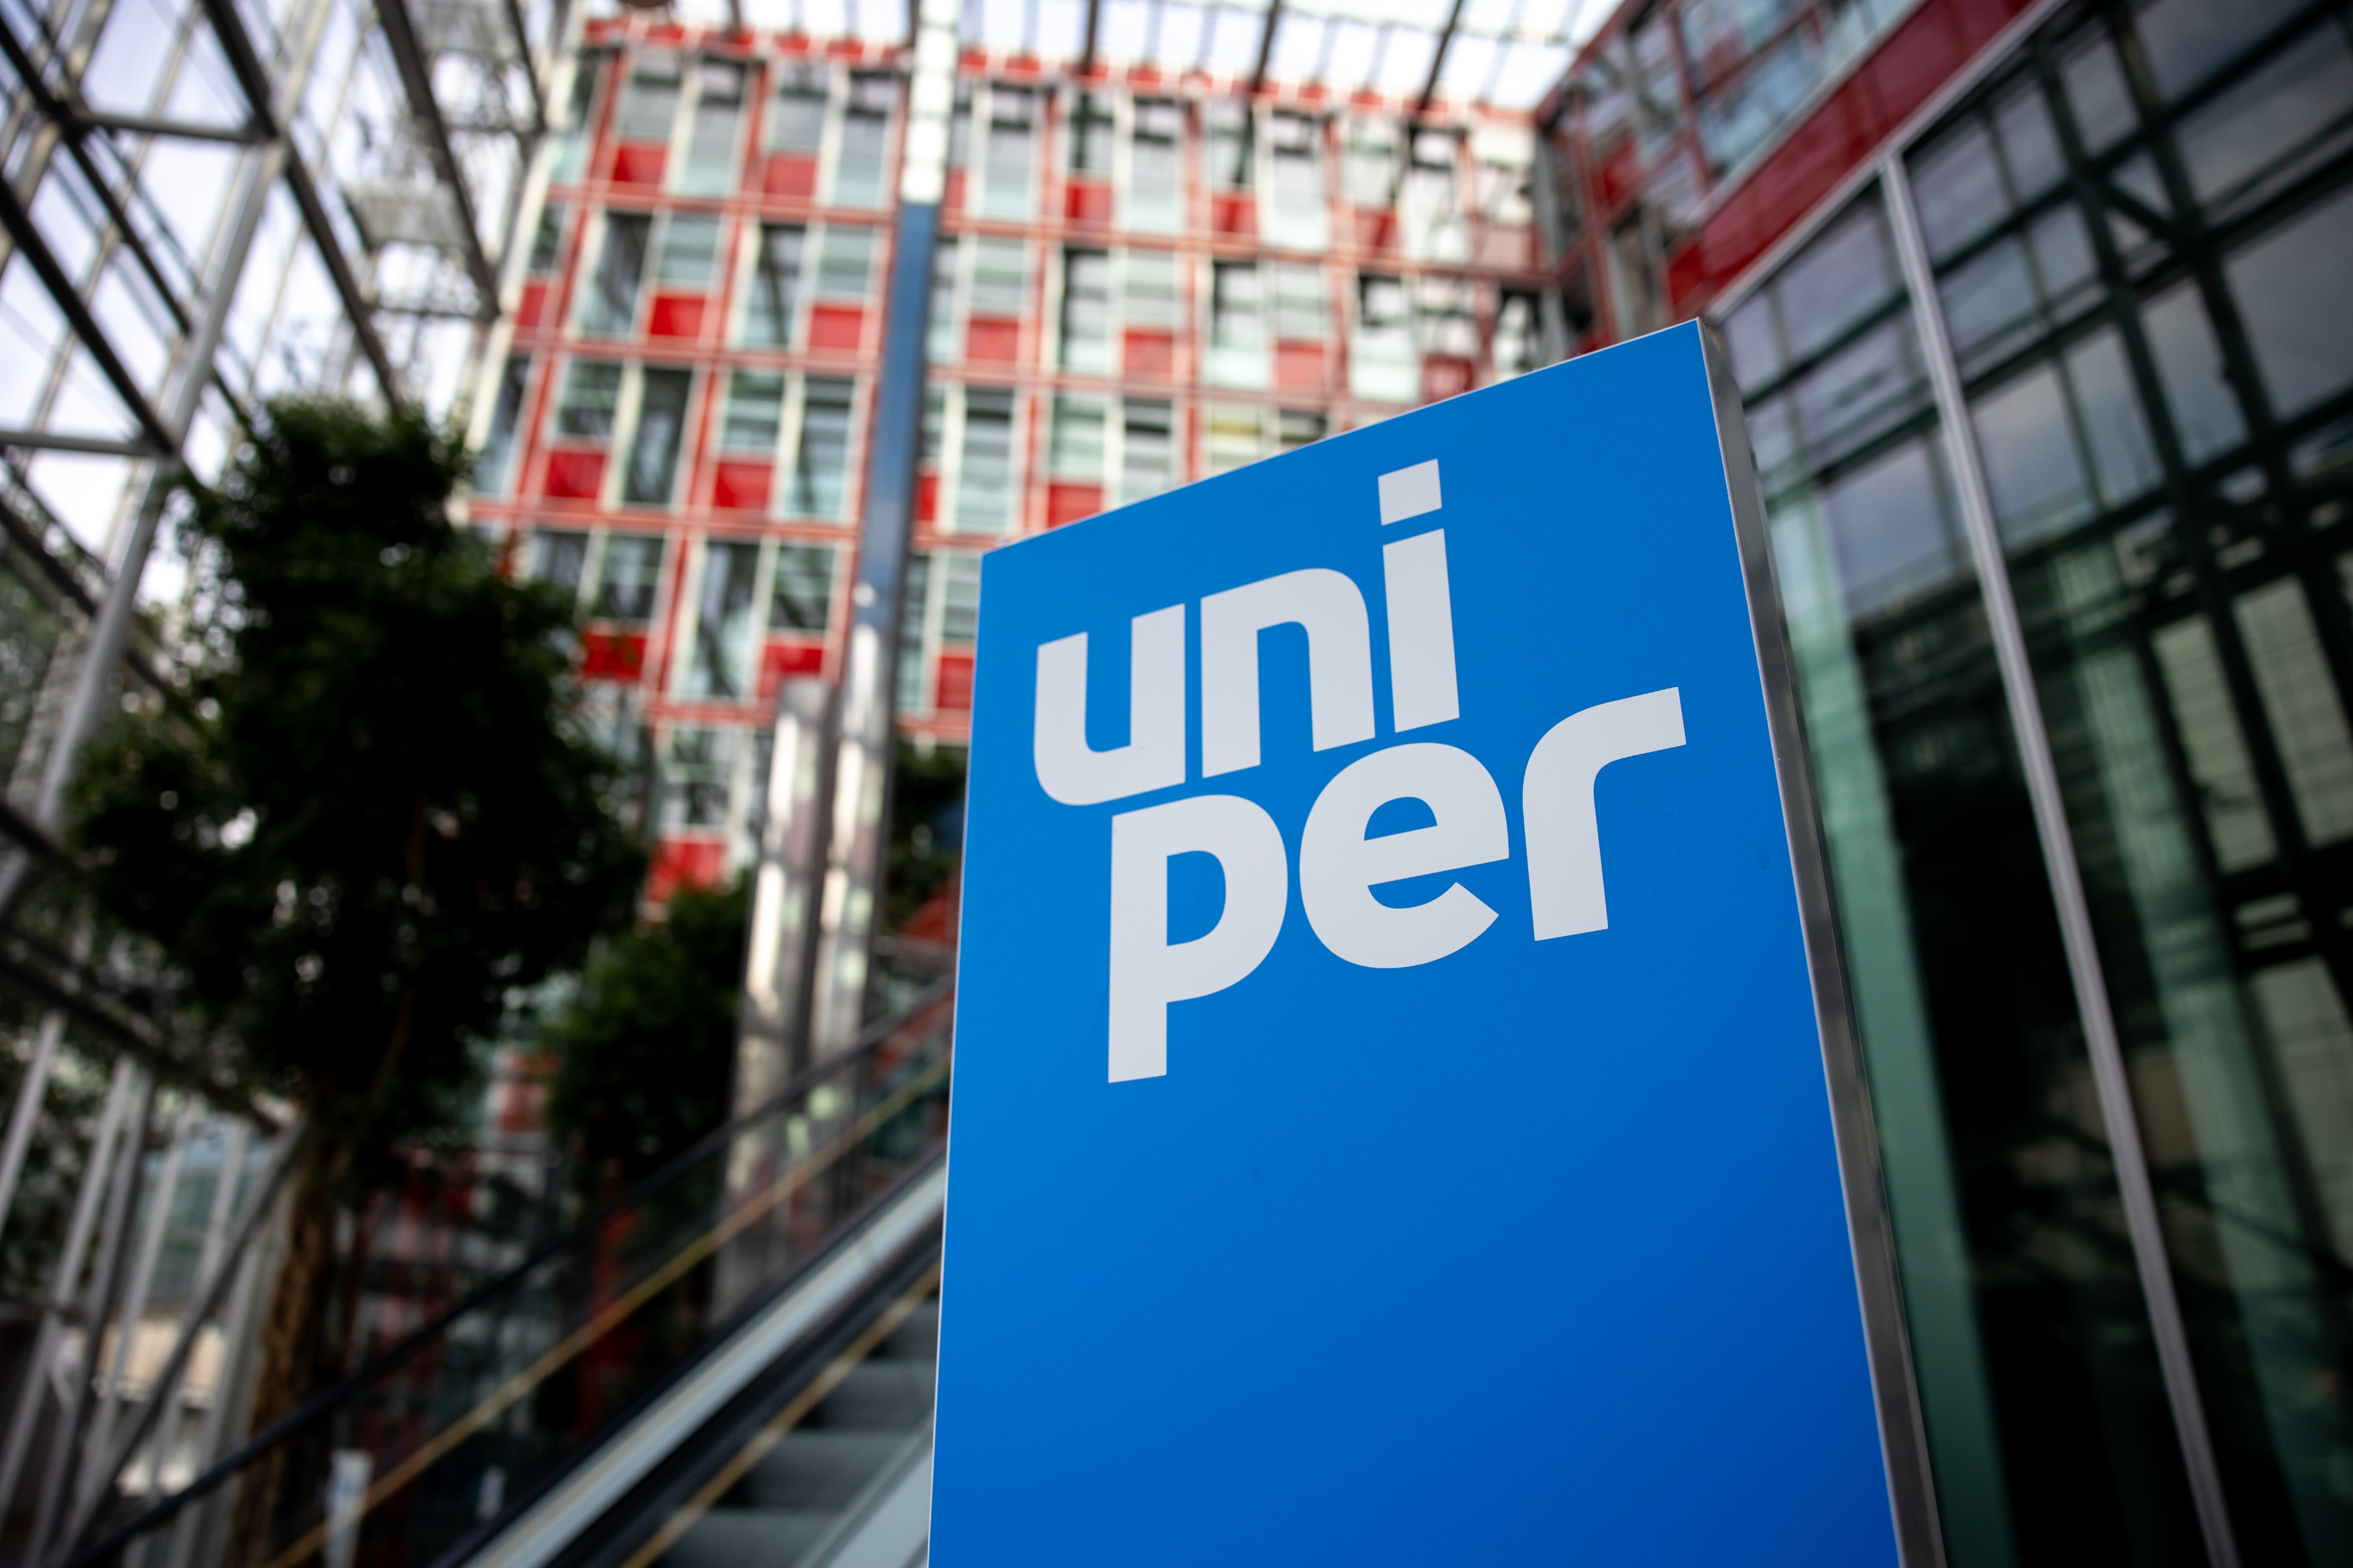 Fortum’s subsidiary Uniper’s net loss for the first half of 2022 was 12 billion euros